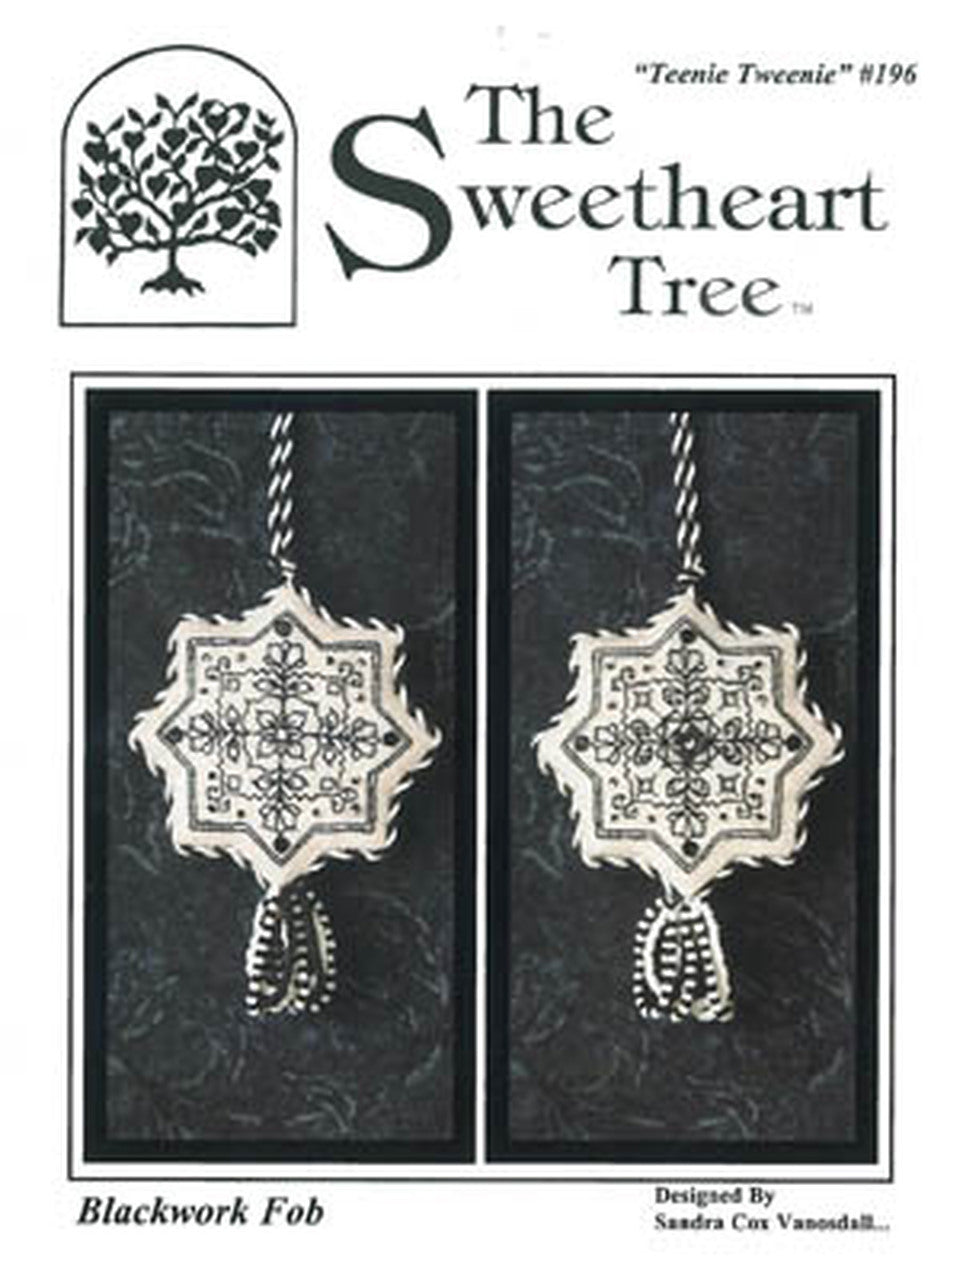 Blackwork Fob Cross Stitch Embroidery Kit from The Sweetheart Tree: Pattern, Linen, Floss, Beads